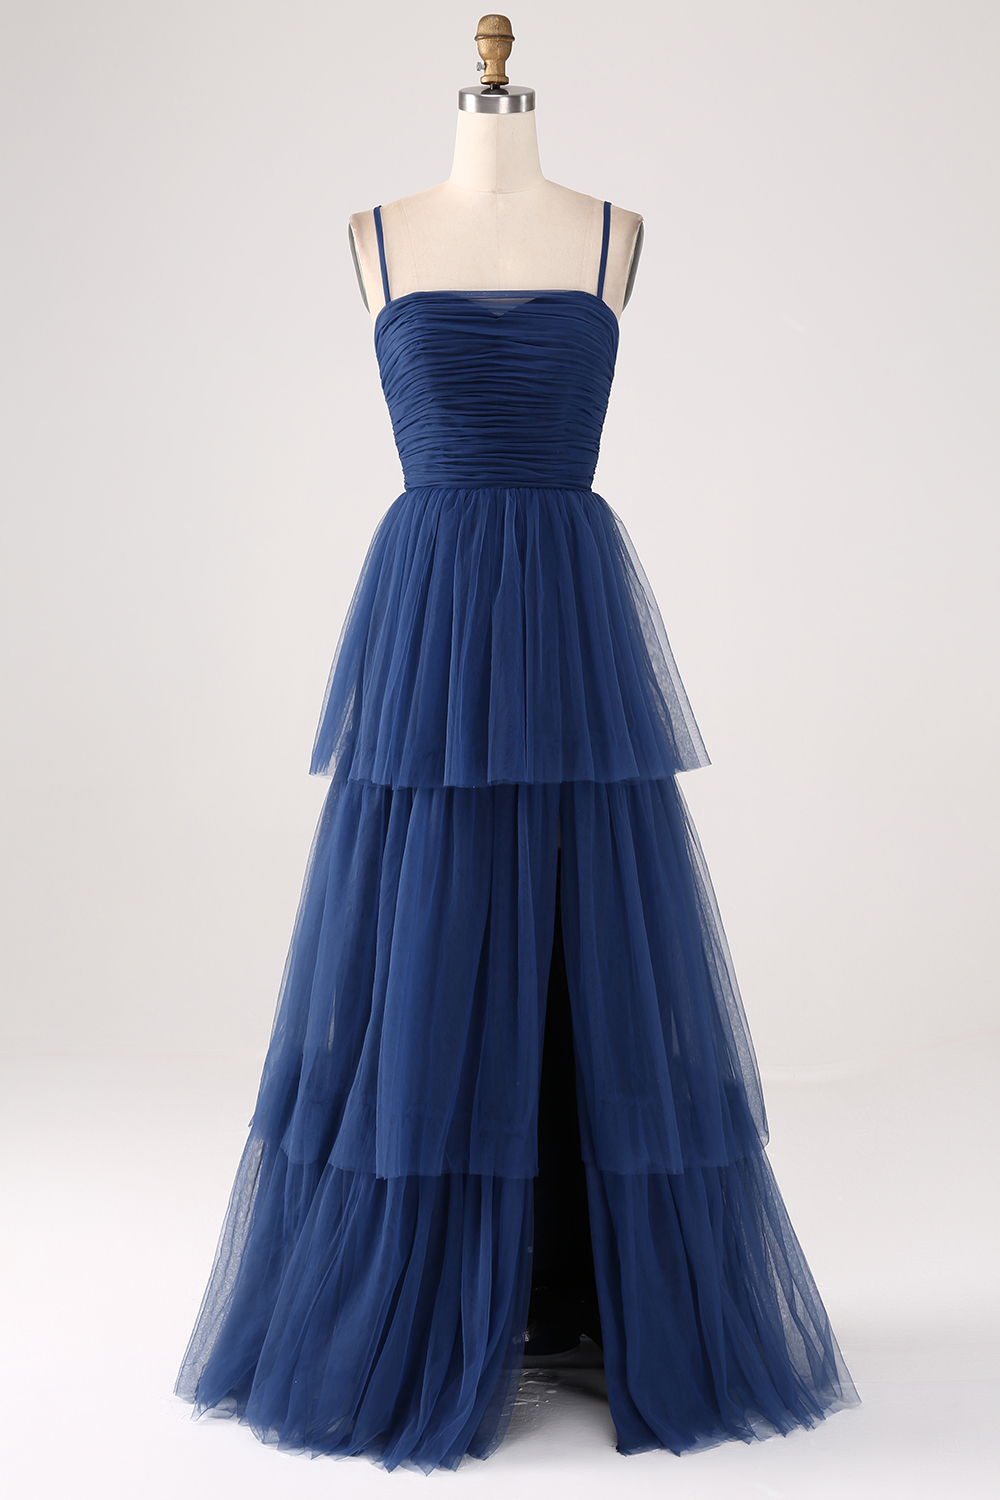 Spaghetti Straps A Line Navy Tulle Tiered Pleated Bridesmaid Dress with Slit